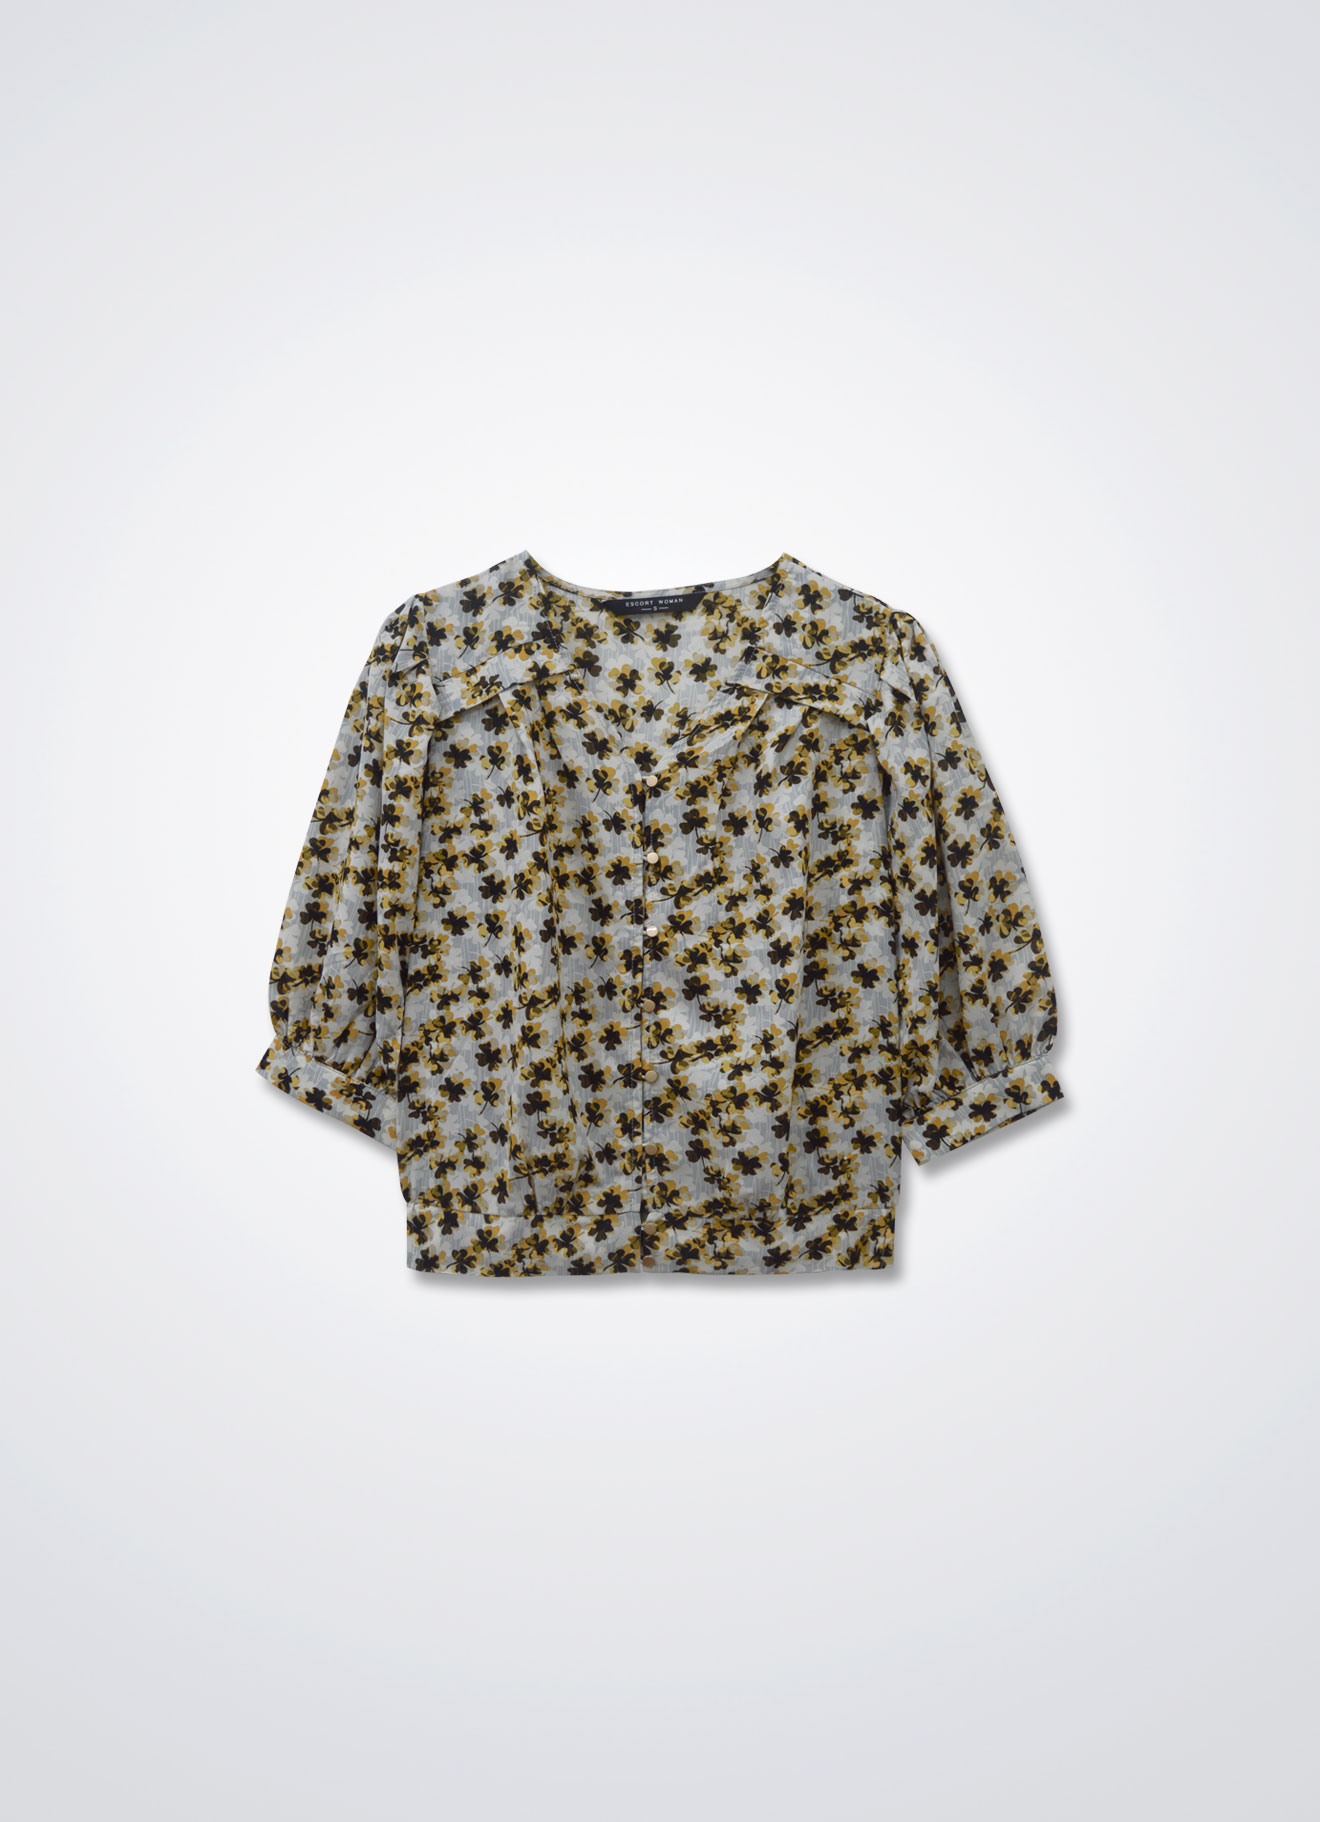 Sunflower by Floral Printed Blouse